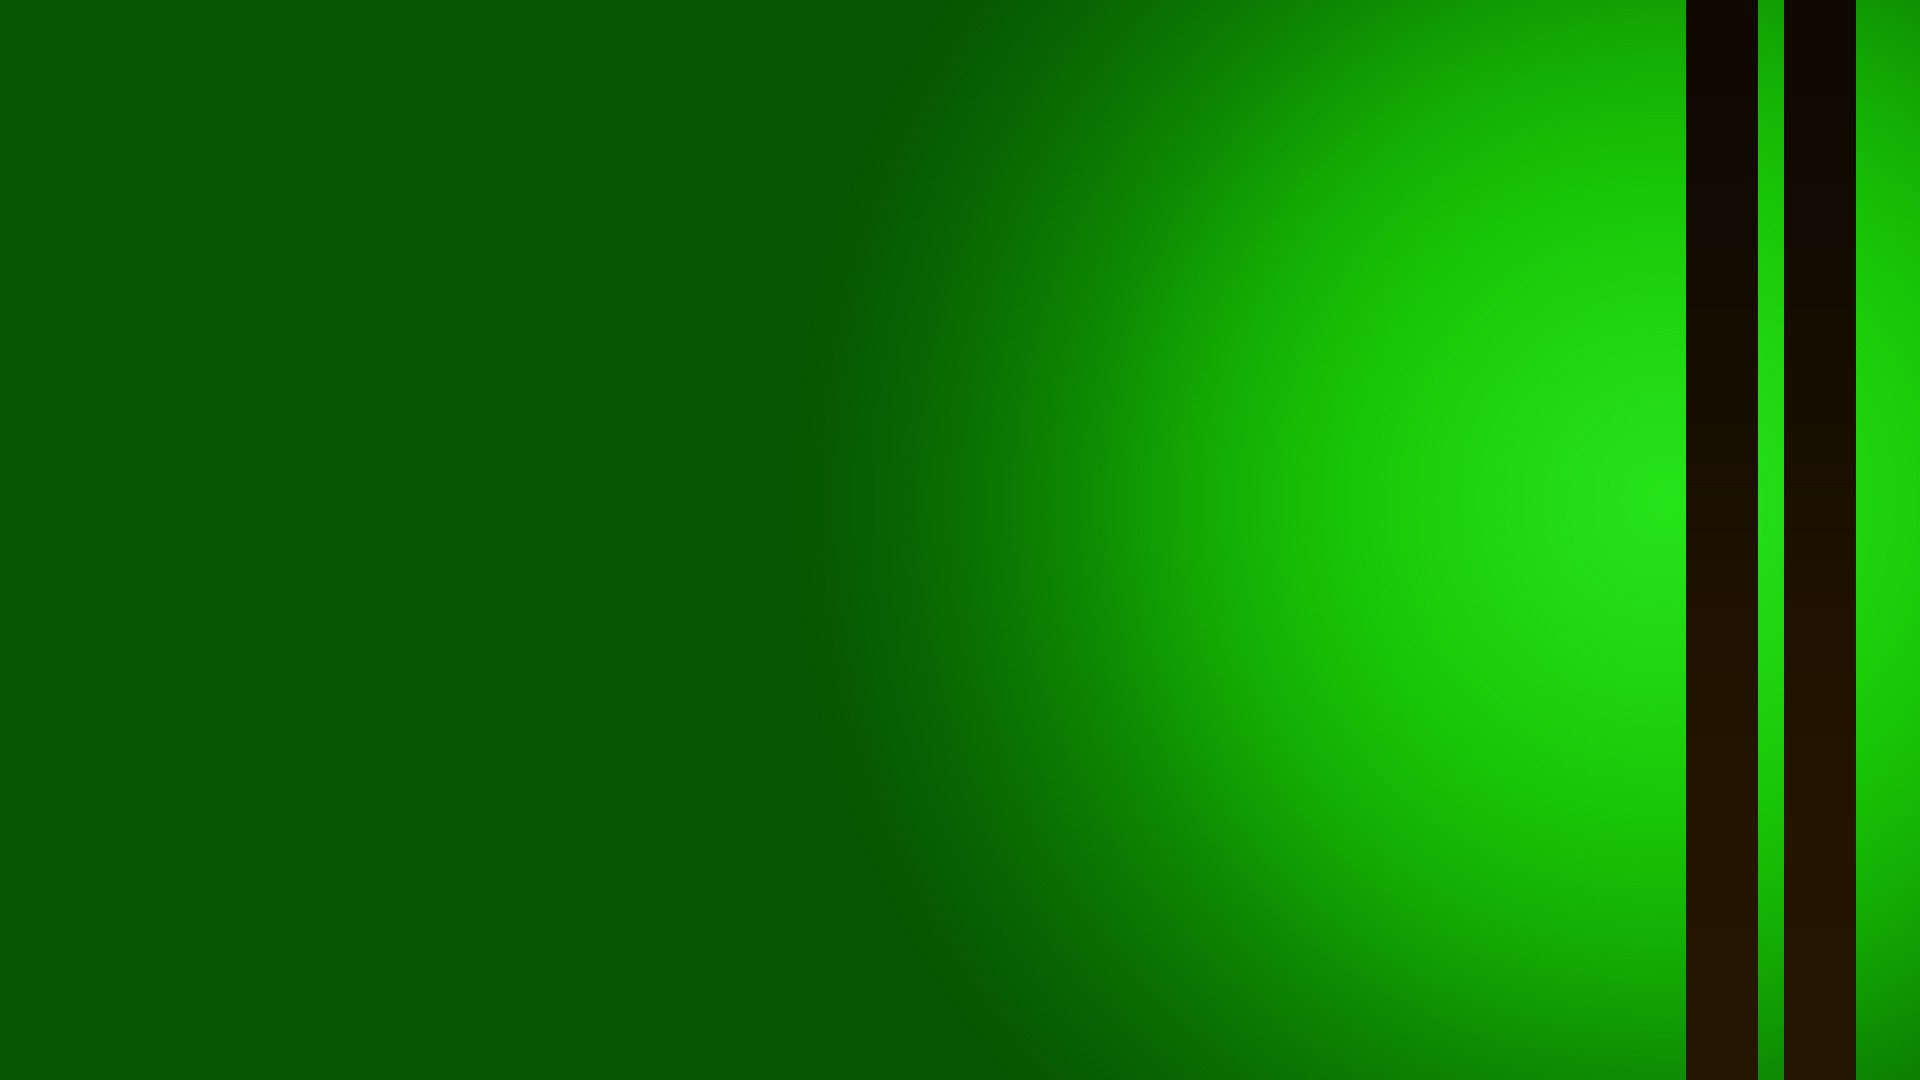 Black and Green Background Wallpaper HD With Resolution 1920X1080 pixel. You can make this wallpaper for your Desktop Computer Backgrounds, Mac Wallpapers, Android Lock screen or iPhone Screensavers